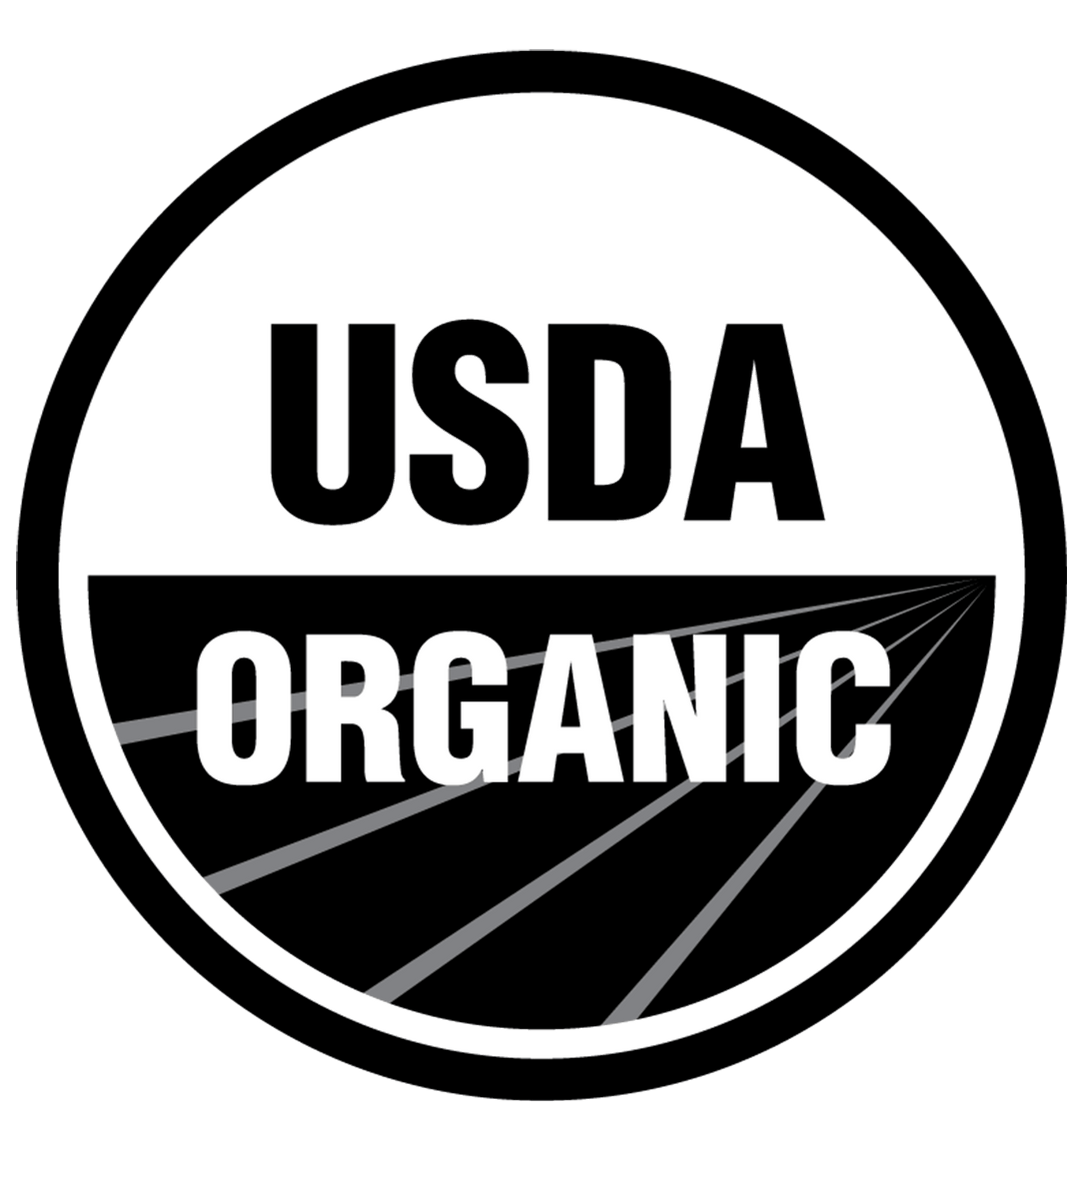 USDA organic official black and whte seal; text: USDA Organic.